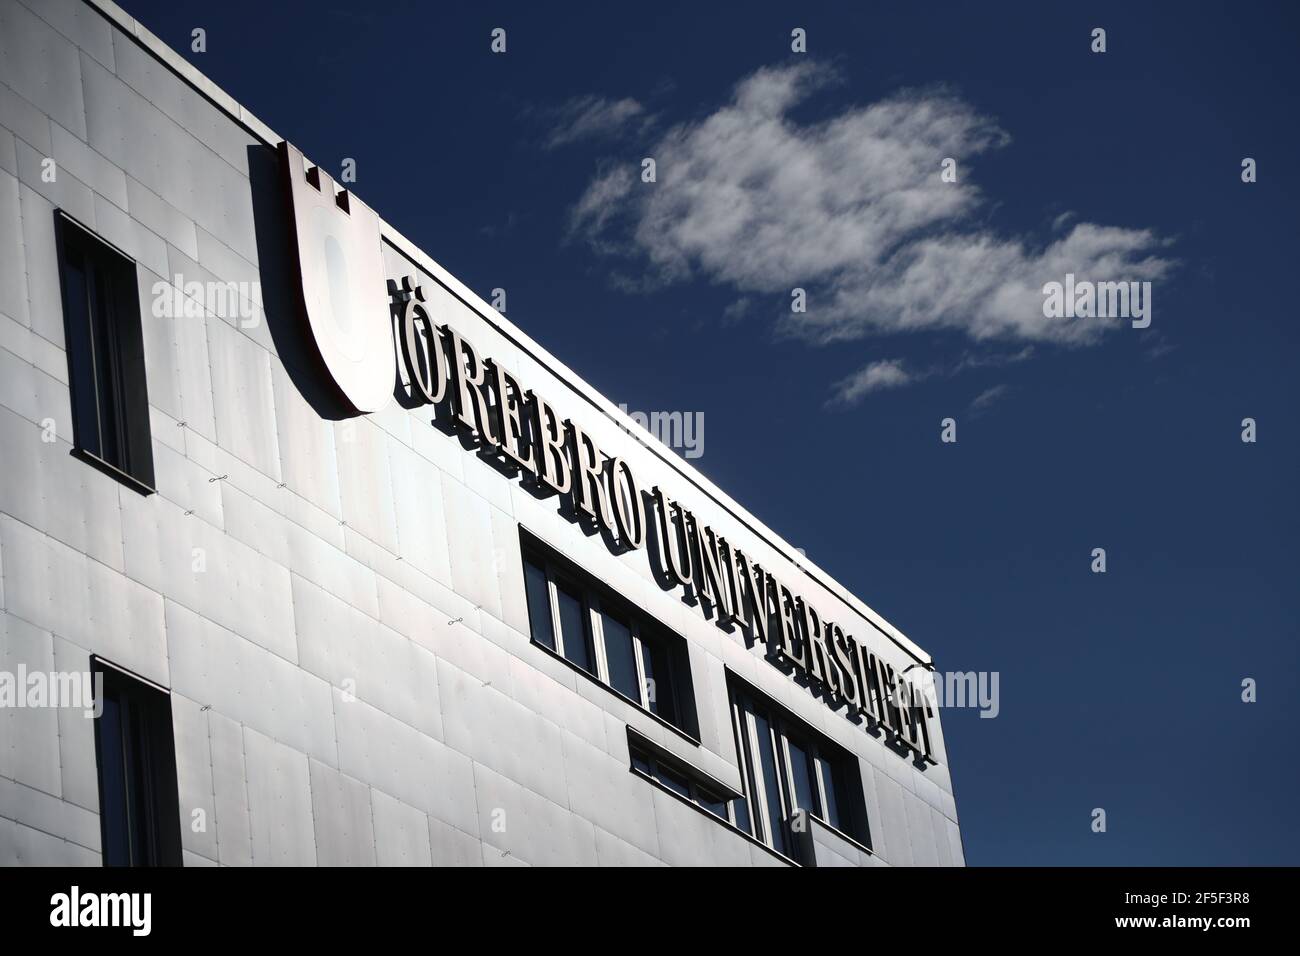 Orebro Universitet High Resolution Stock Photography And Images Alamy